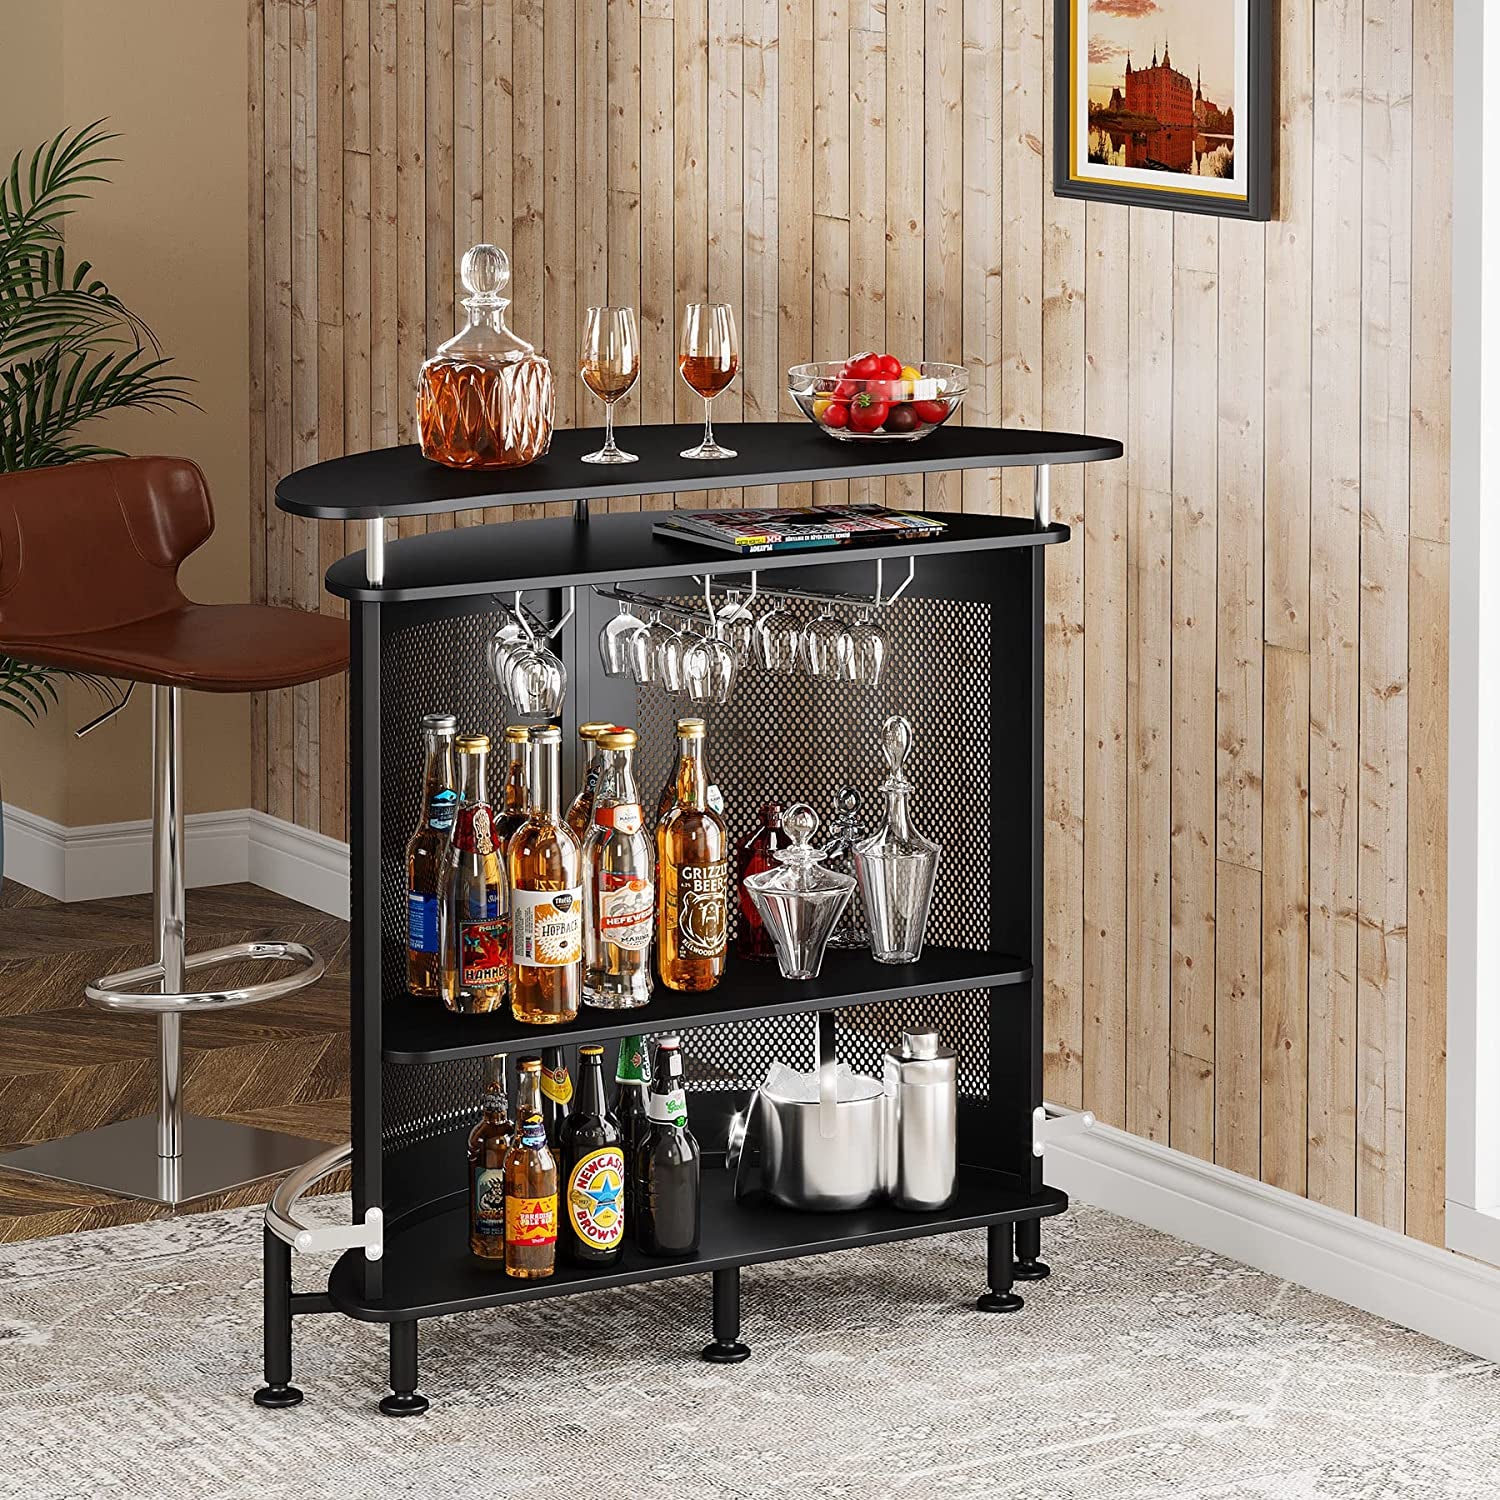 Bar Unit with Metal Mesh Front, Home Liquor Bar Table with Storage and Footrest (Black)